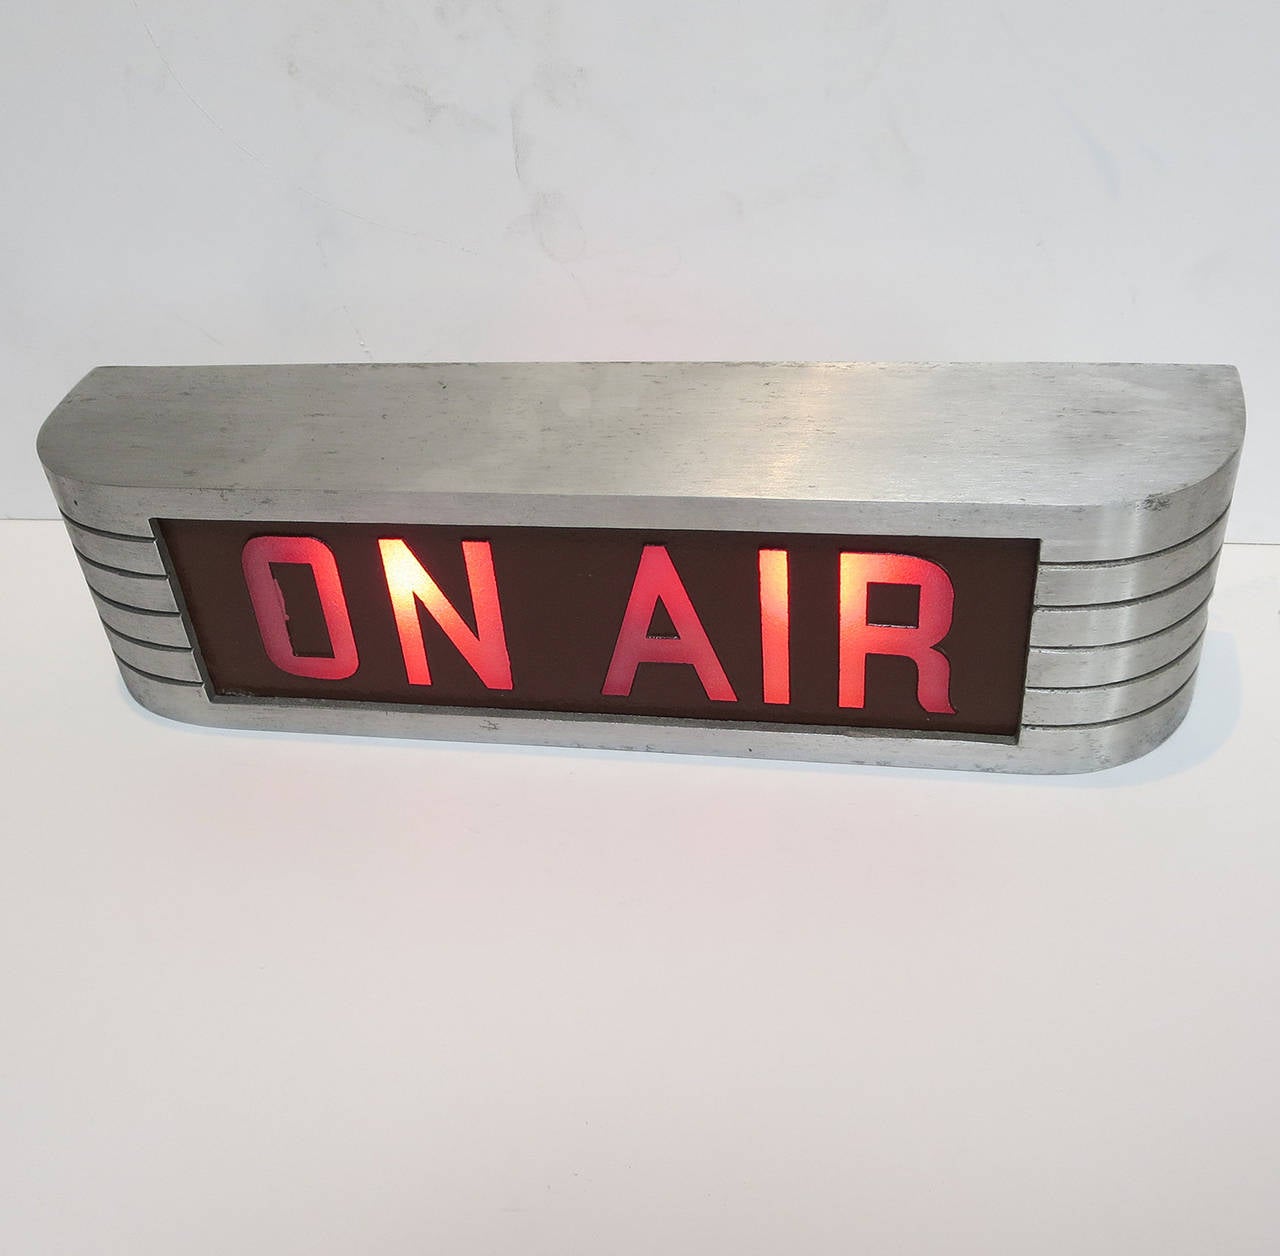 In the early days of live radio and television, one had to make sure unwanted sounds were not captured on air. This warning lamp was mounted above a doorway to alert any employee or visitor that a live recording was in progress. The body of the sign